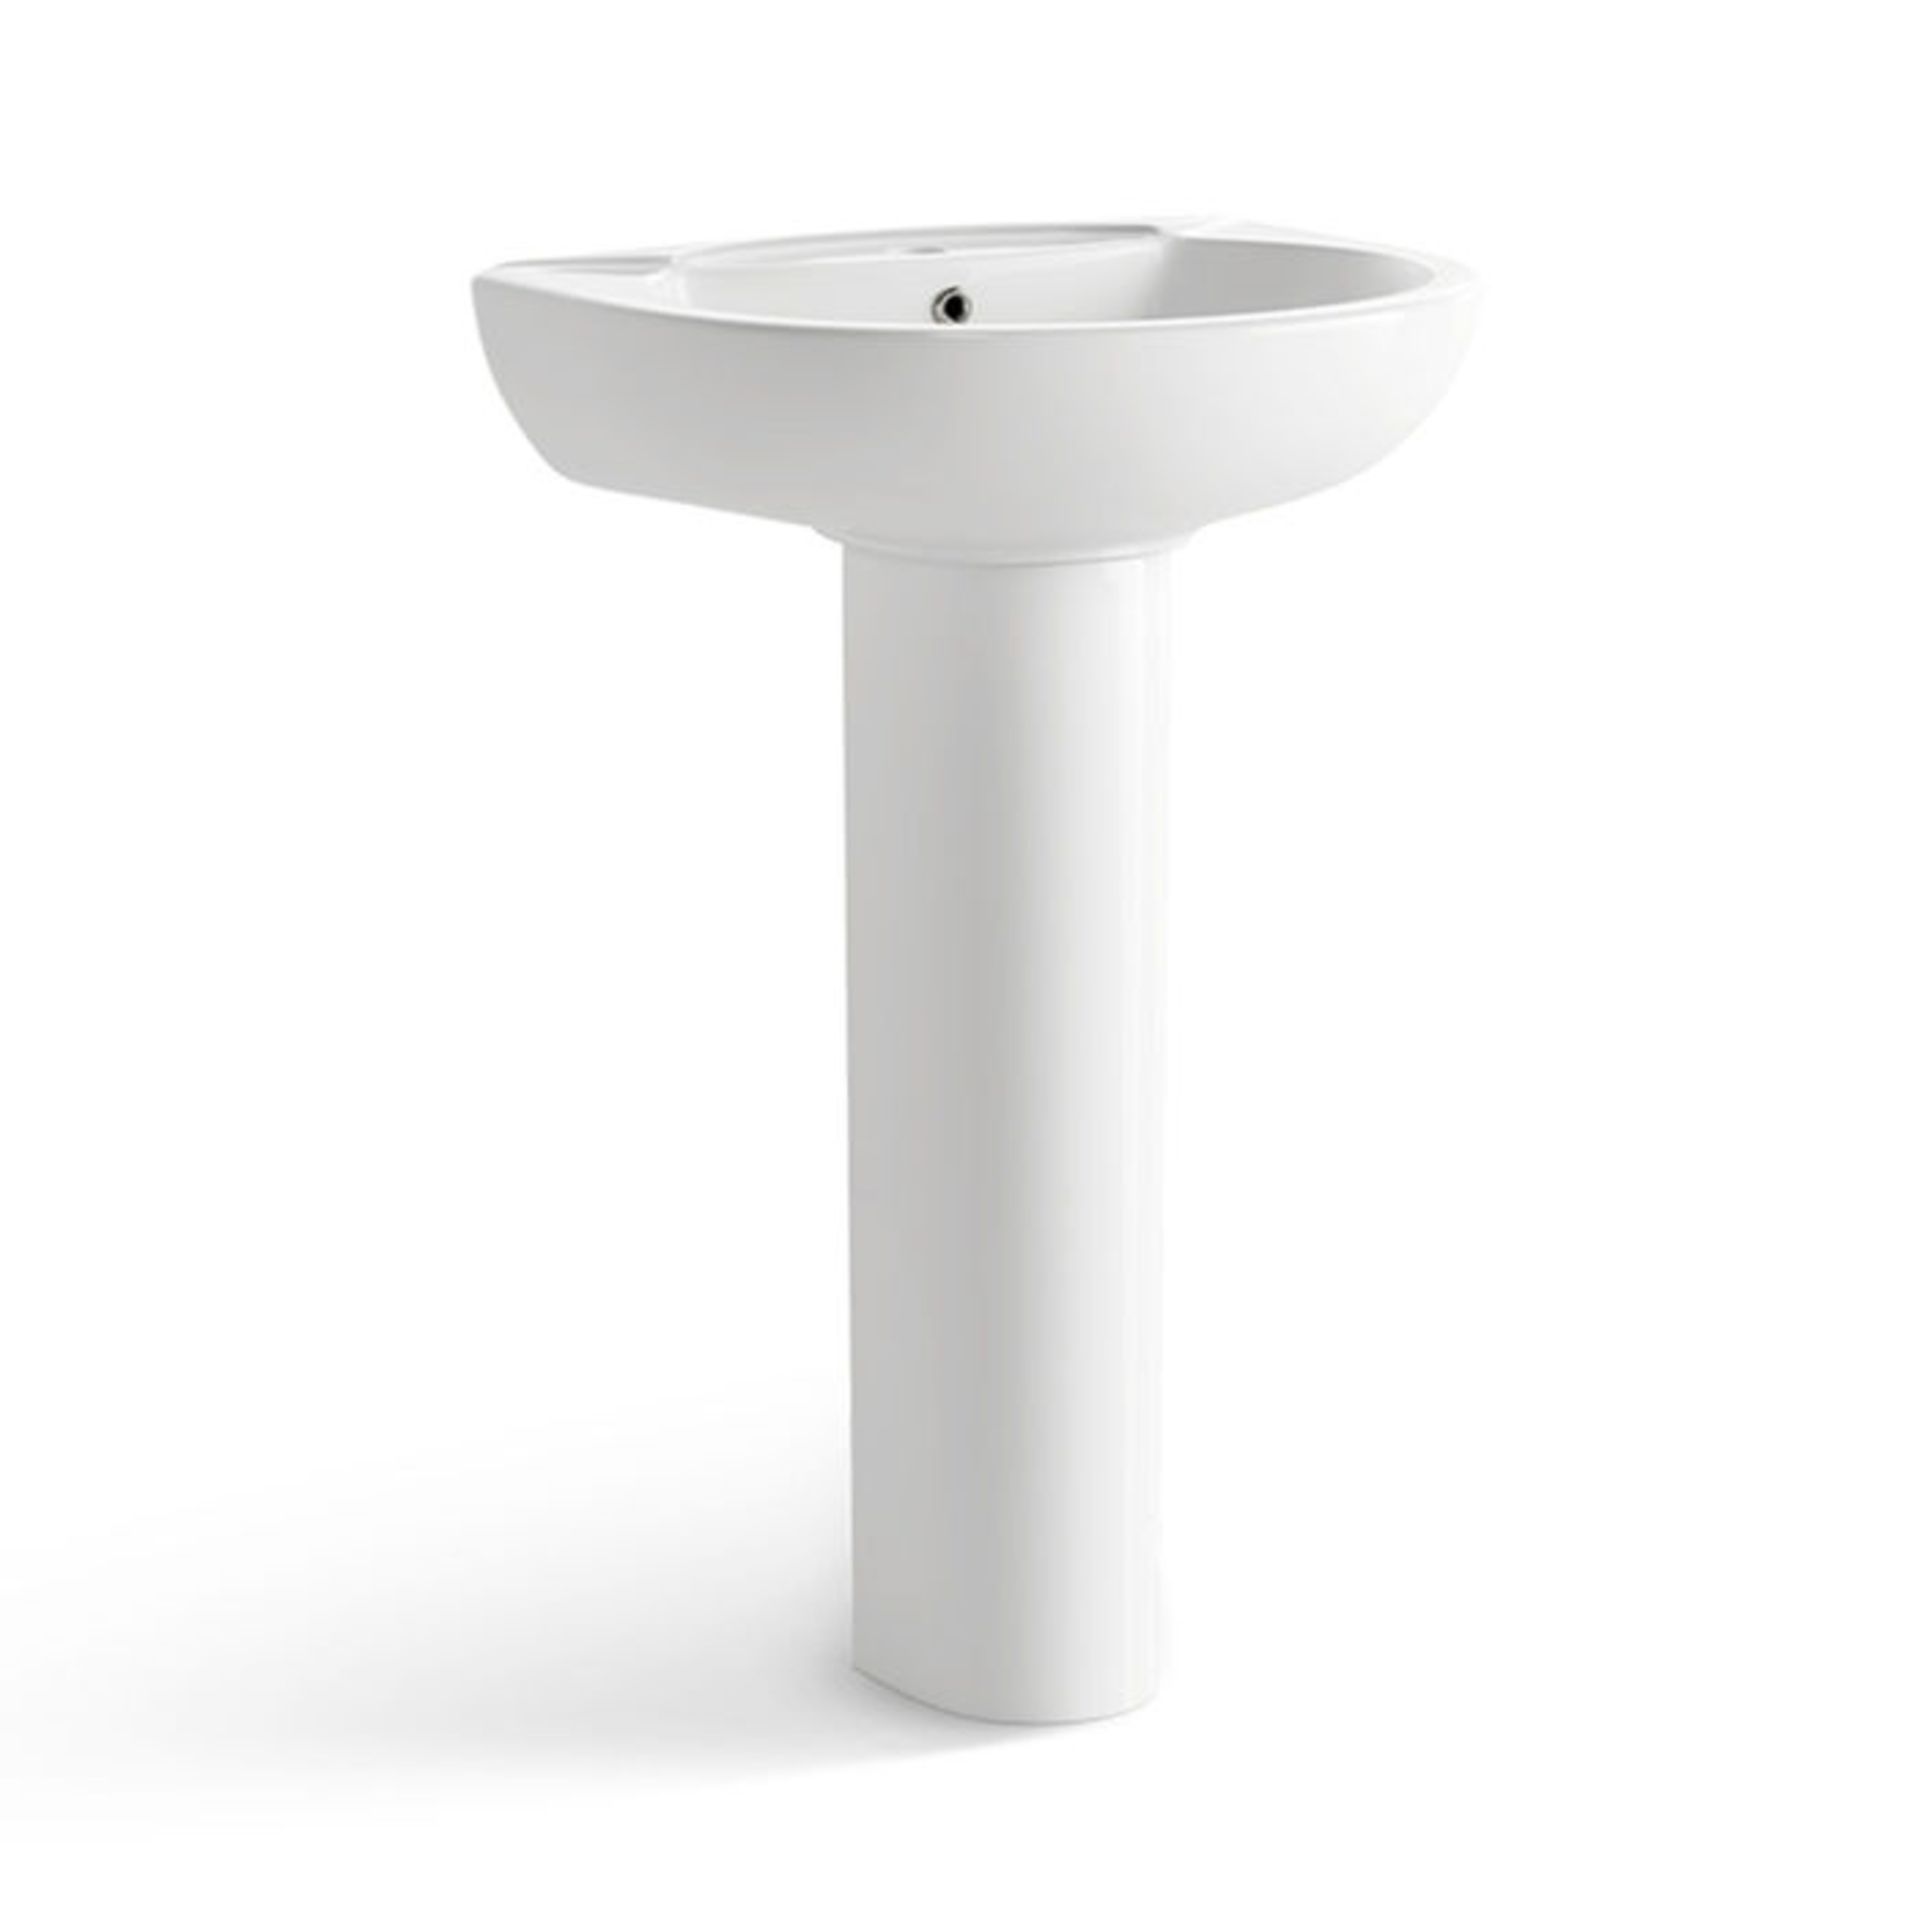 Sink & Pedestal - Single Tap Hole. Made from White Vitreous China and finished with a high glos...